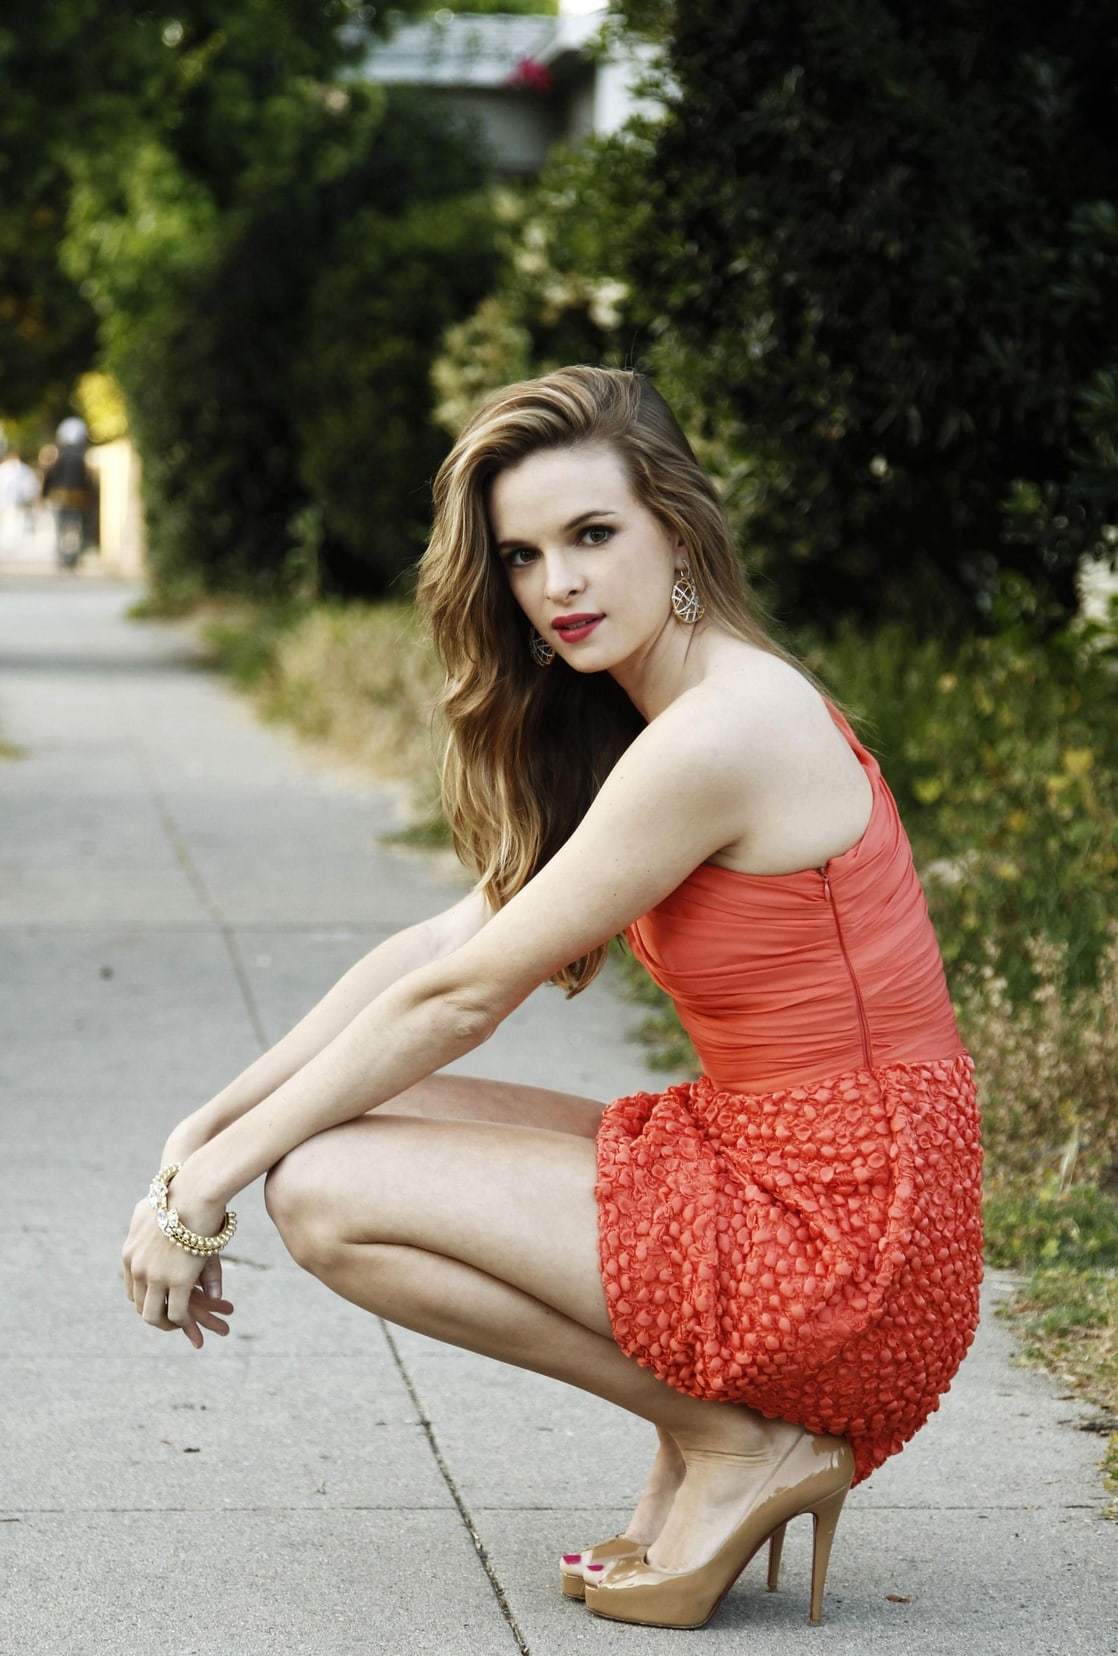 49 Sexy Danielle Panabaker Feet Pictures Which Are Stunningly Ravishing | Best Of Comic Books